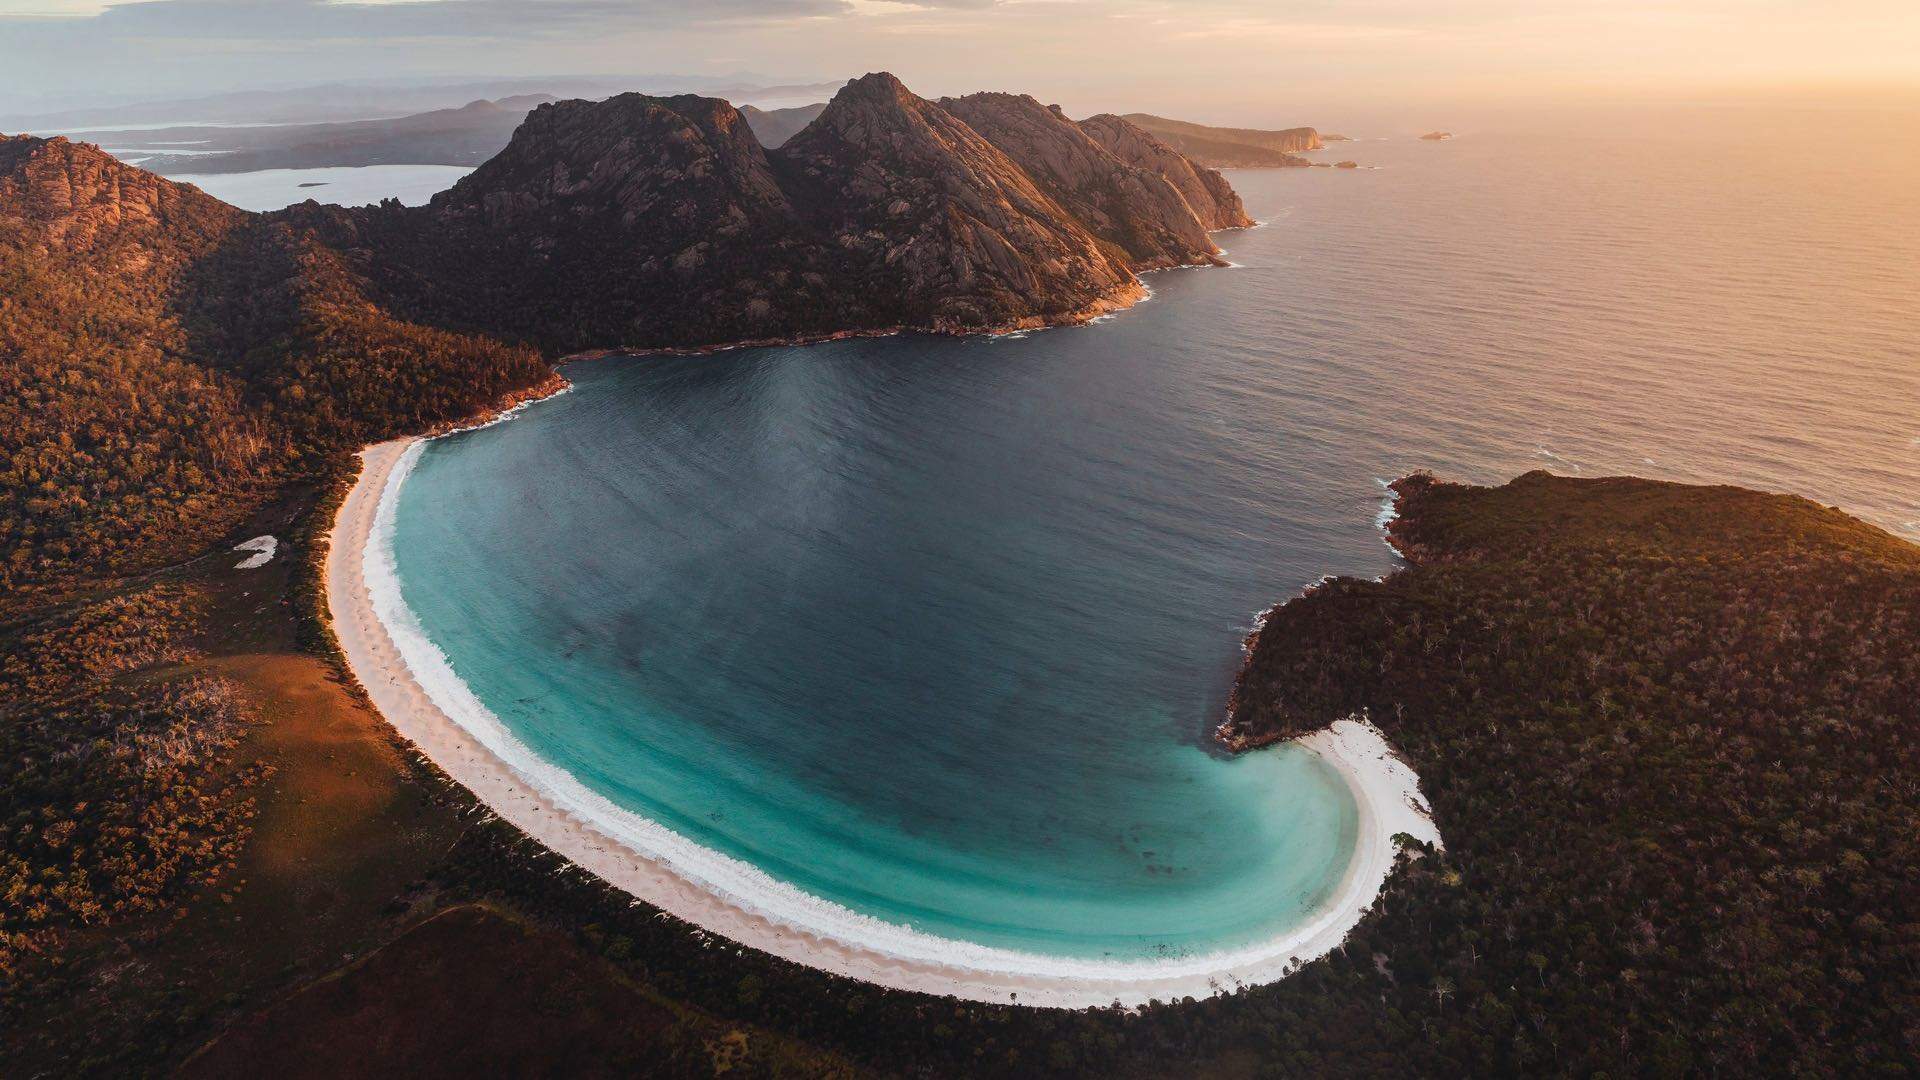 Wineglass Bay - one of the best beaches in Australia